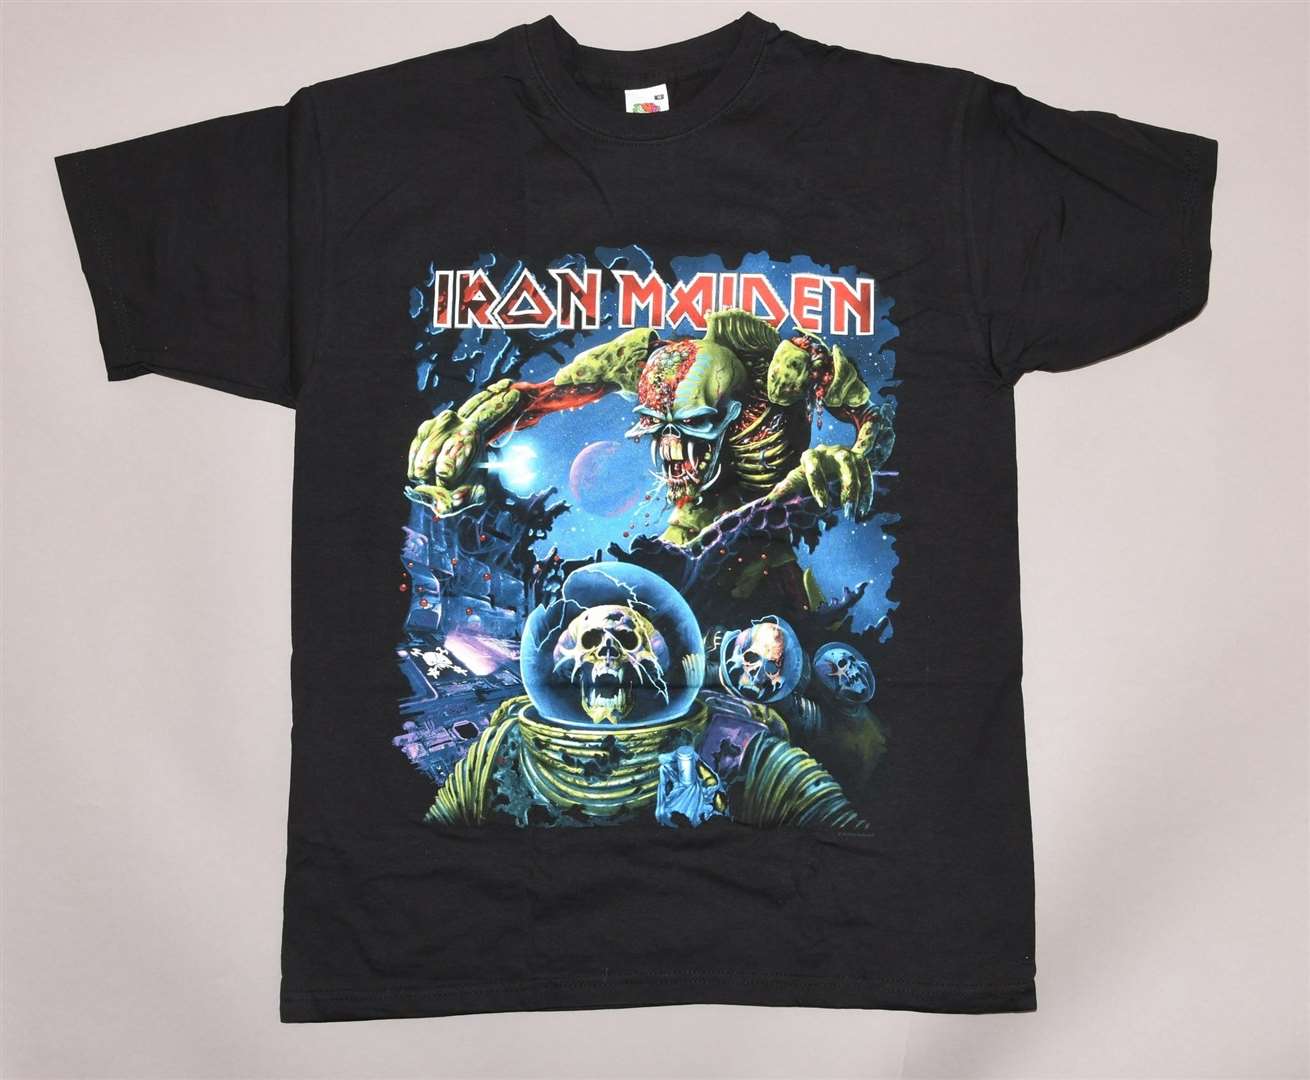 Last year a person wearing an Iron Maiden t-shirt was of noted inetrest to officers